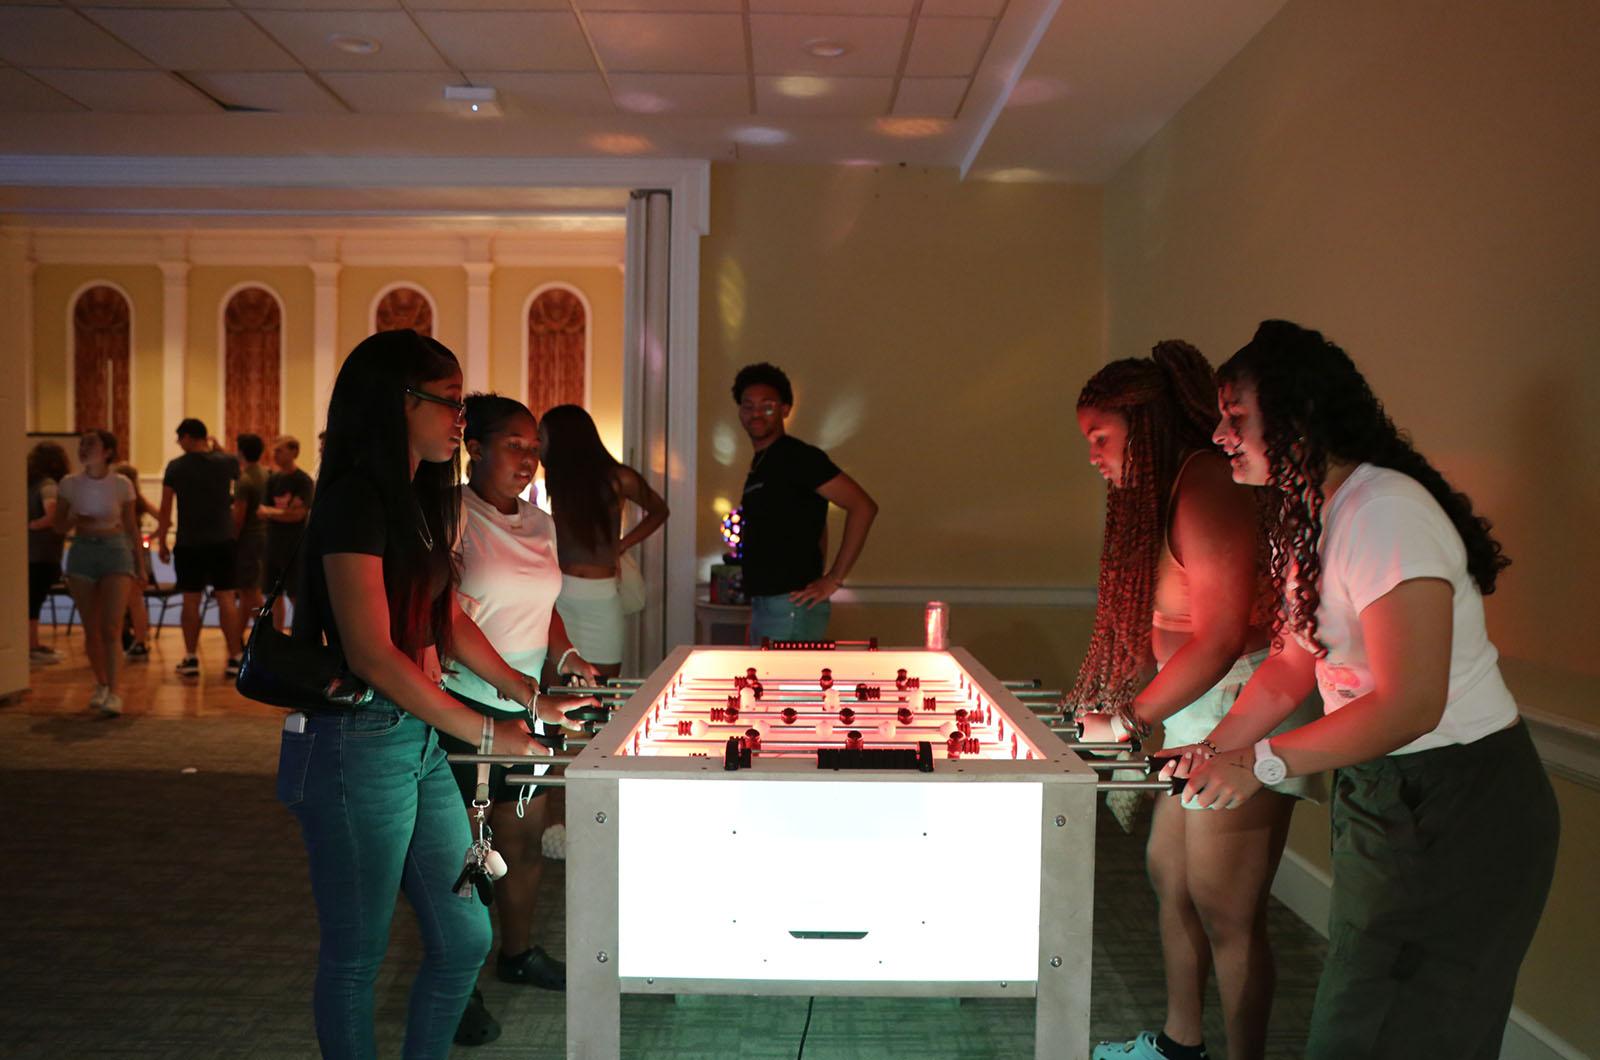 group of students playing foosball on a glowing table